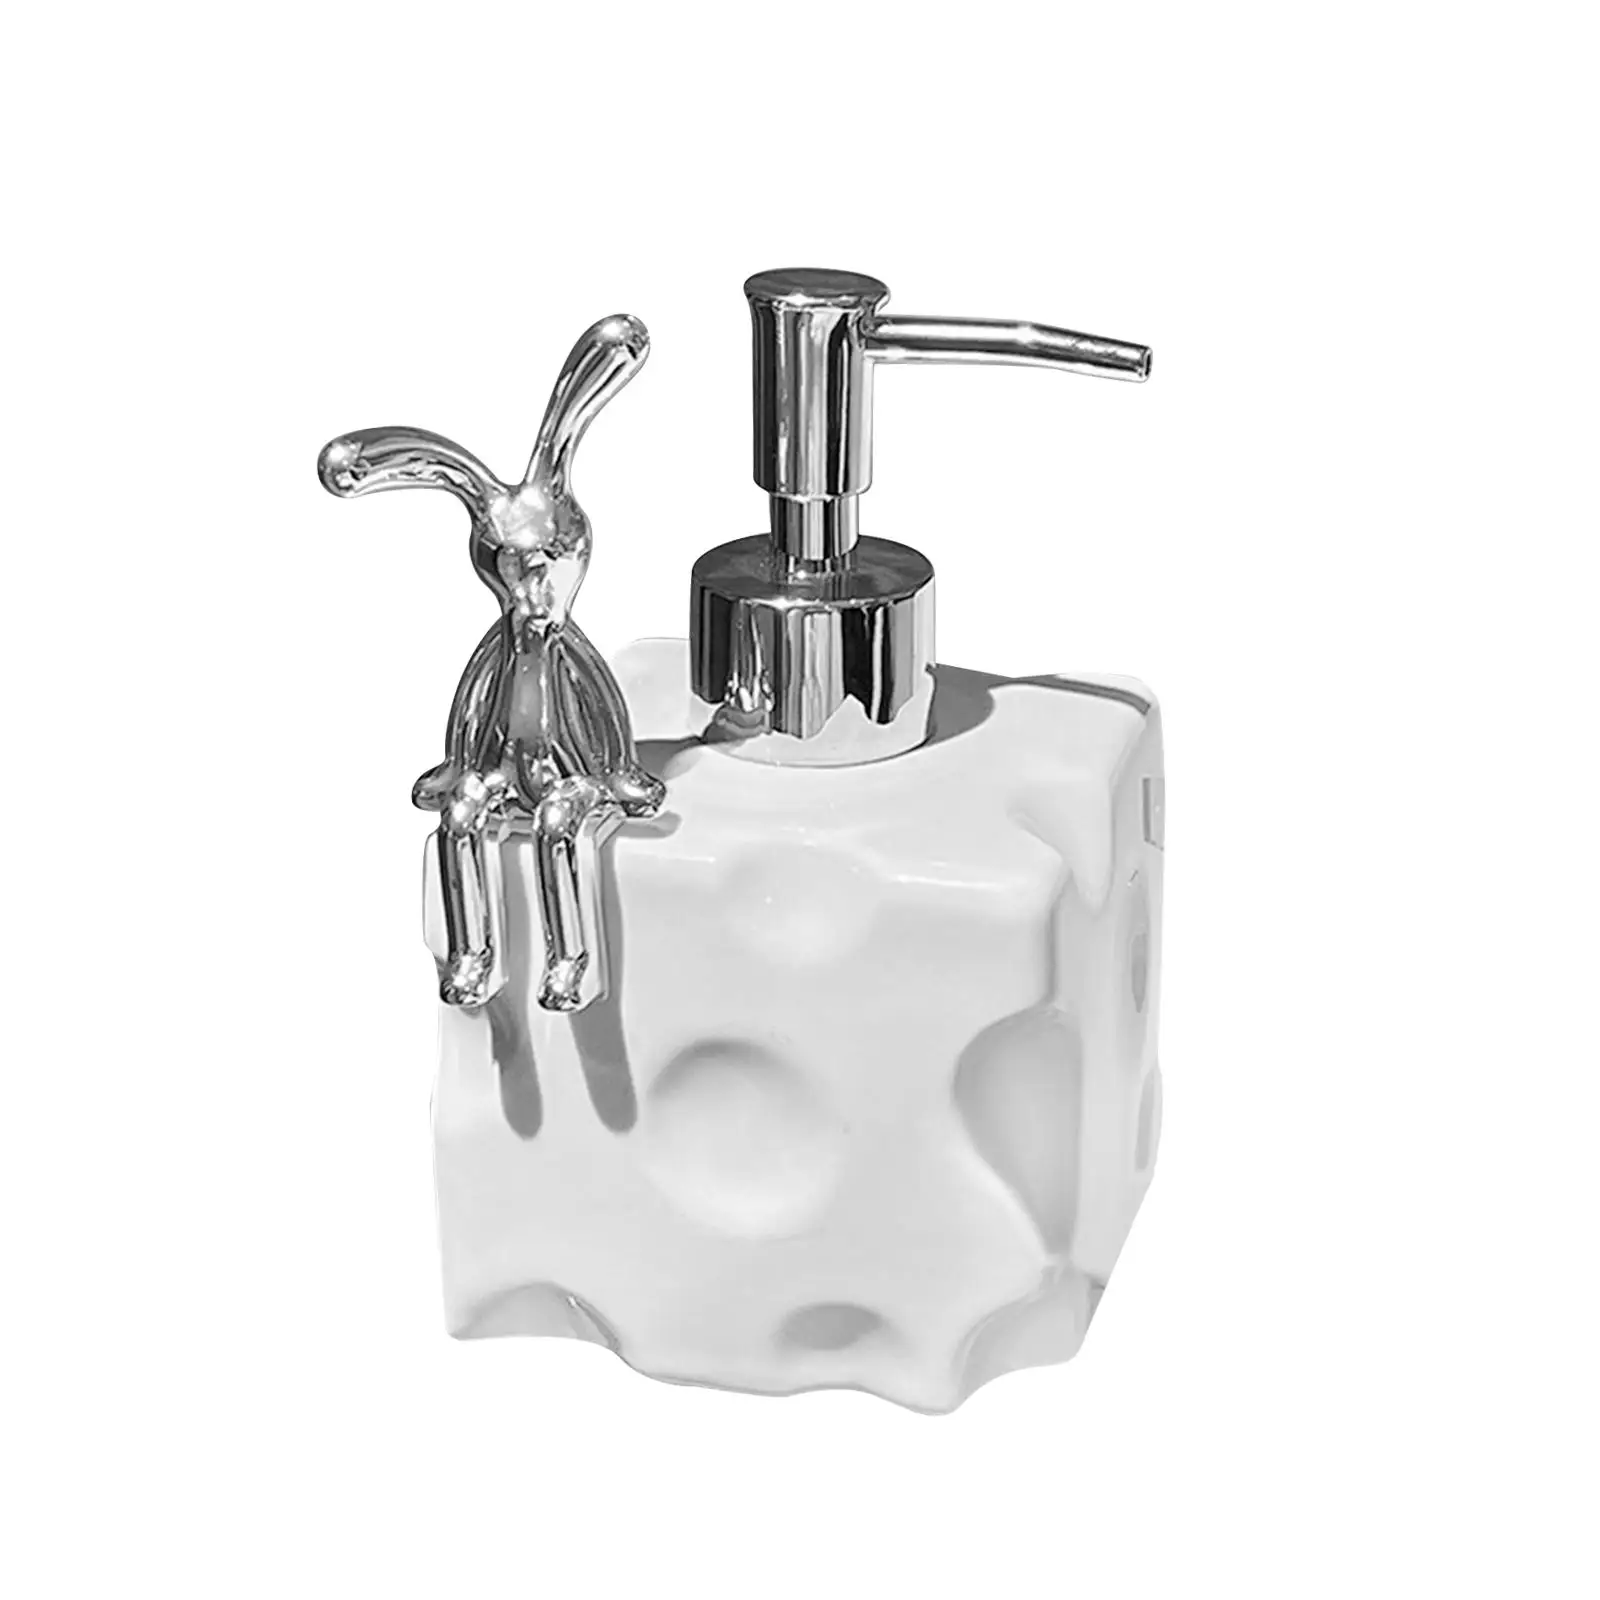 Manual Soap Dispenser Pump Soap Container for Kitchen Laundry Room